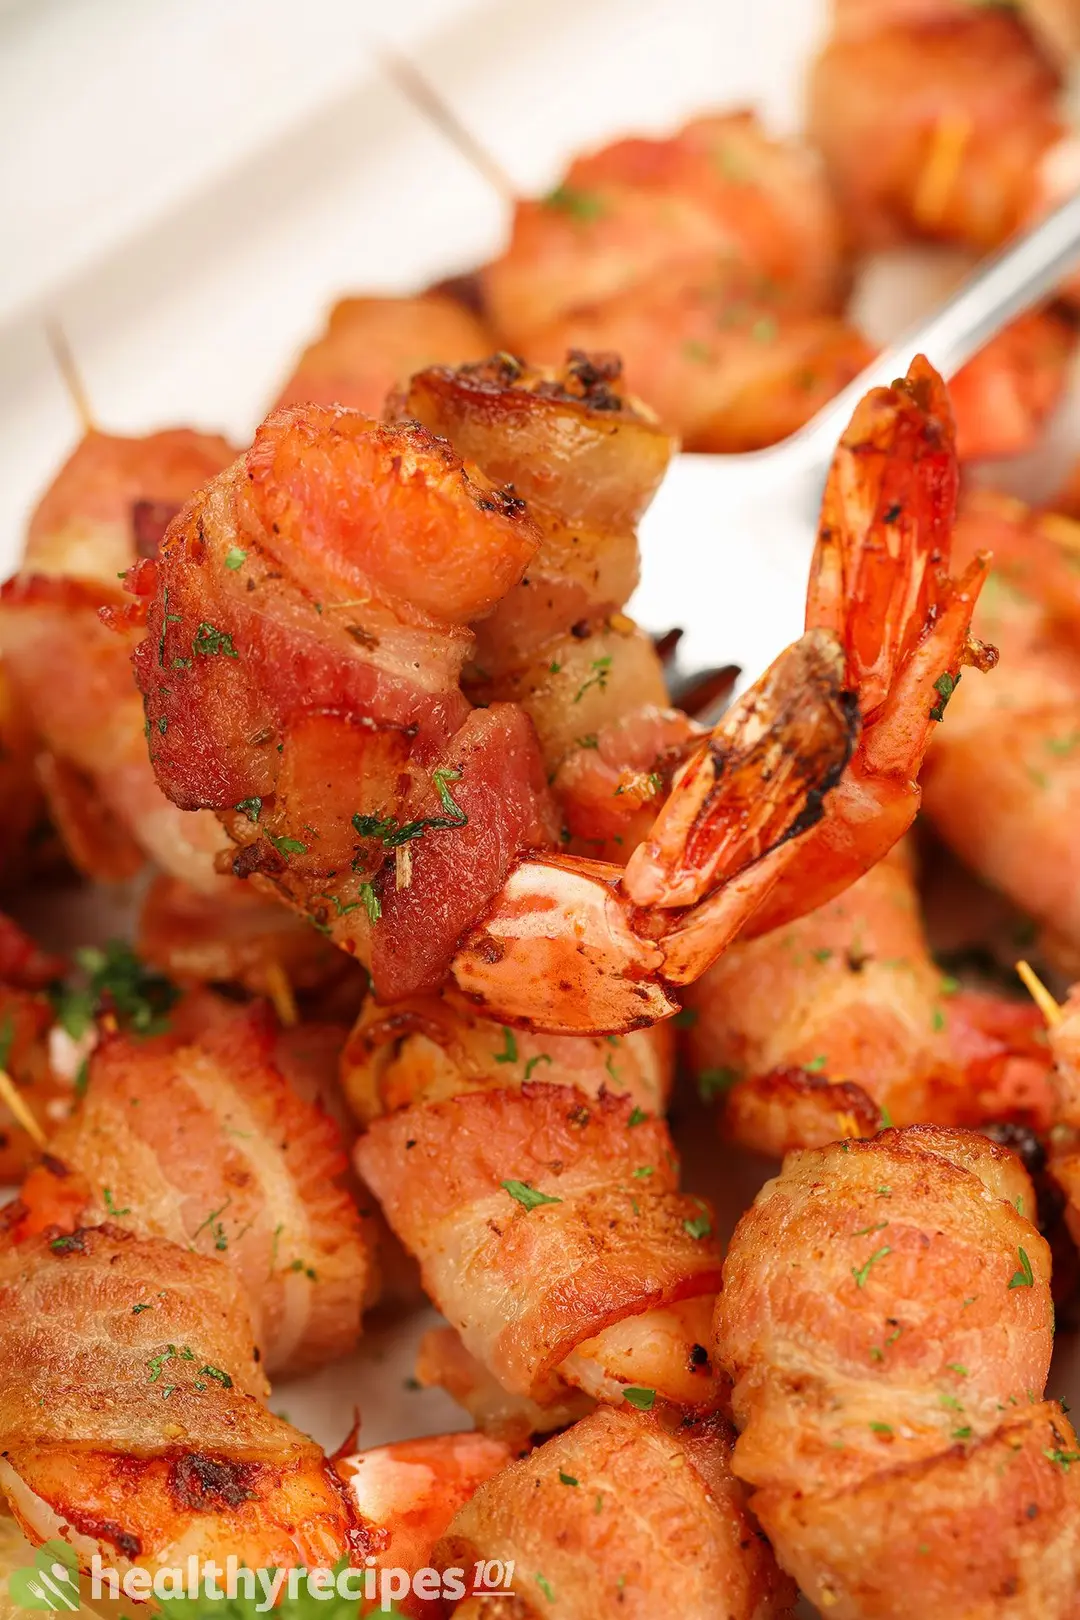 Is This Bacon Wrapped Shrimp Recipe Healthy